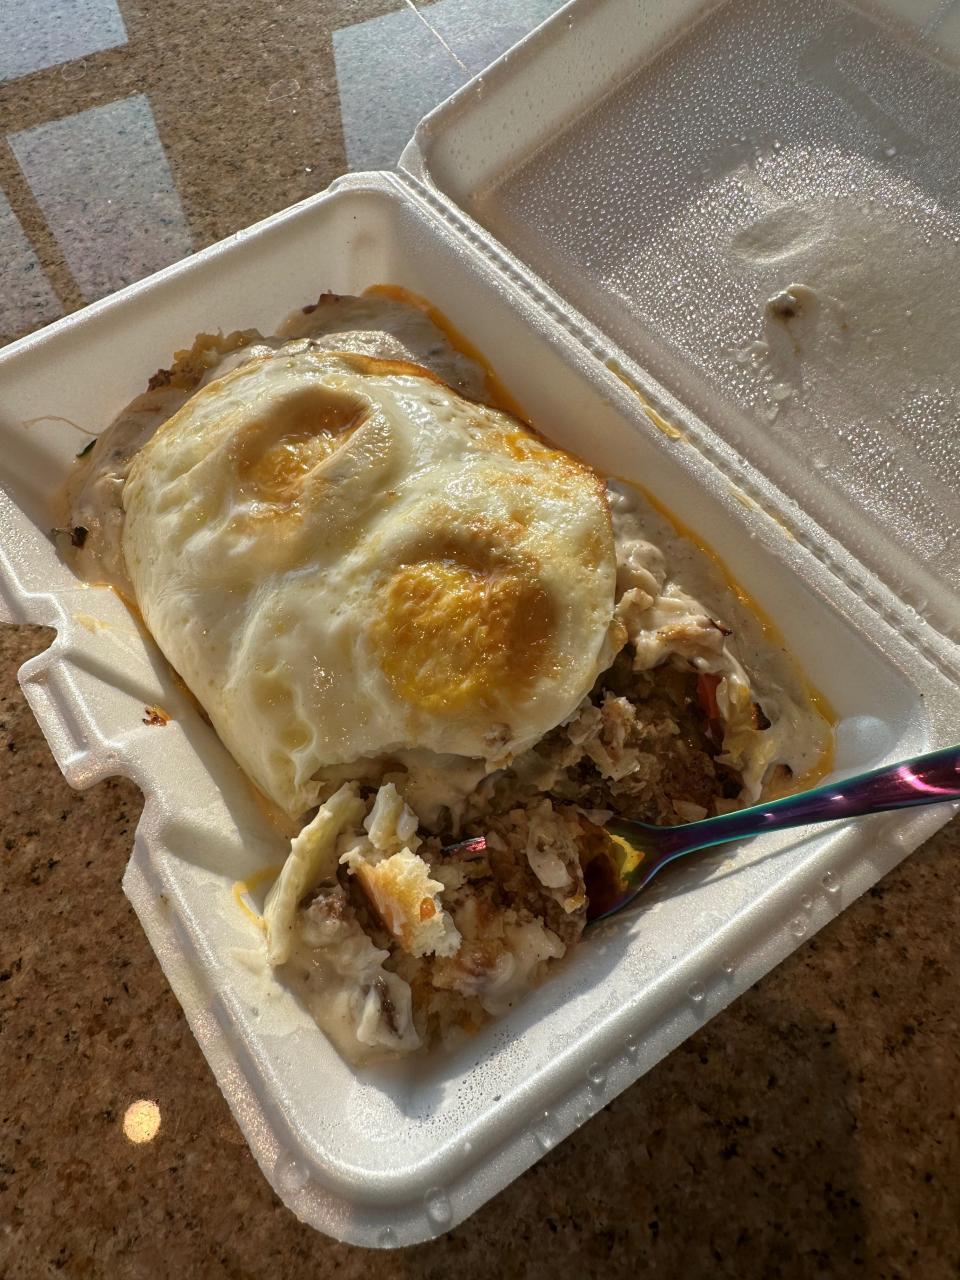 The hangover bowl from Price Hill Chili  includes a generous portion of eggs, home fries, biscuits, gravy, cheese, and your choice of meat. That choice should be goetta, if you know what's good for you.